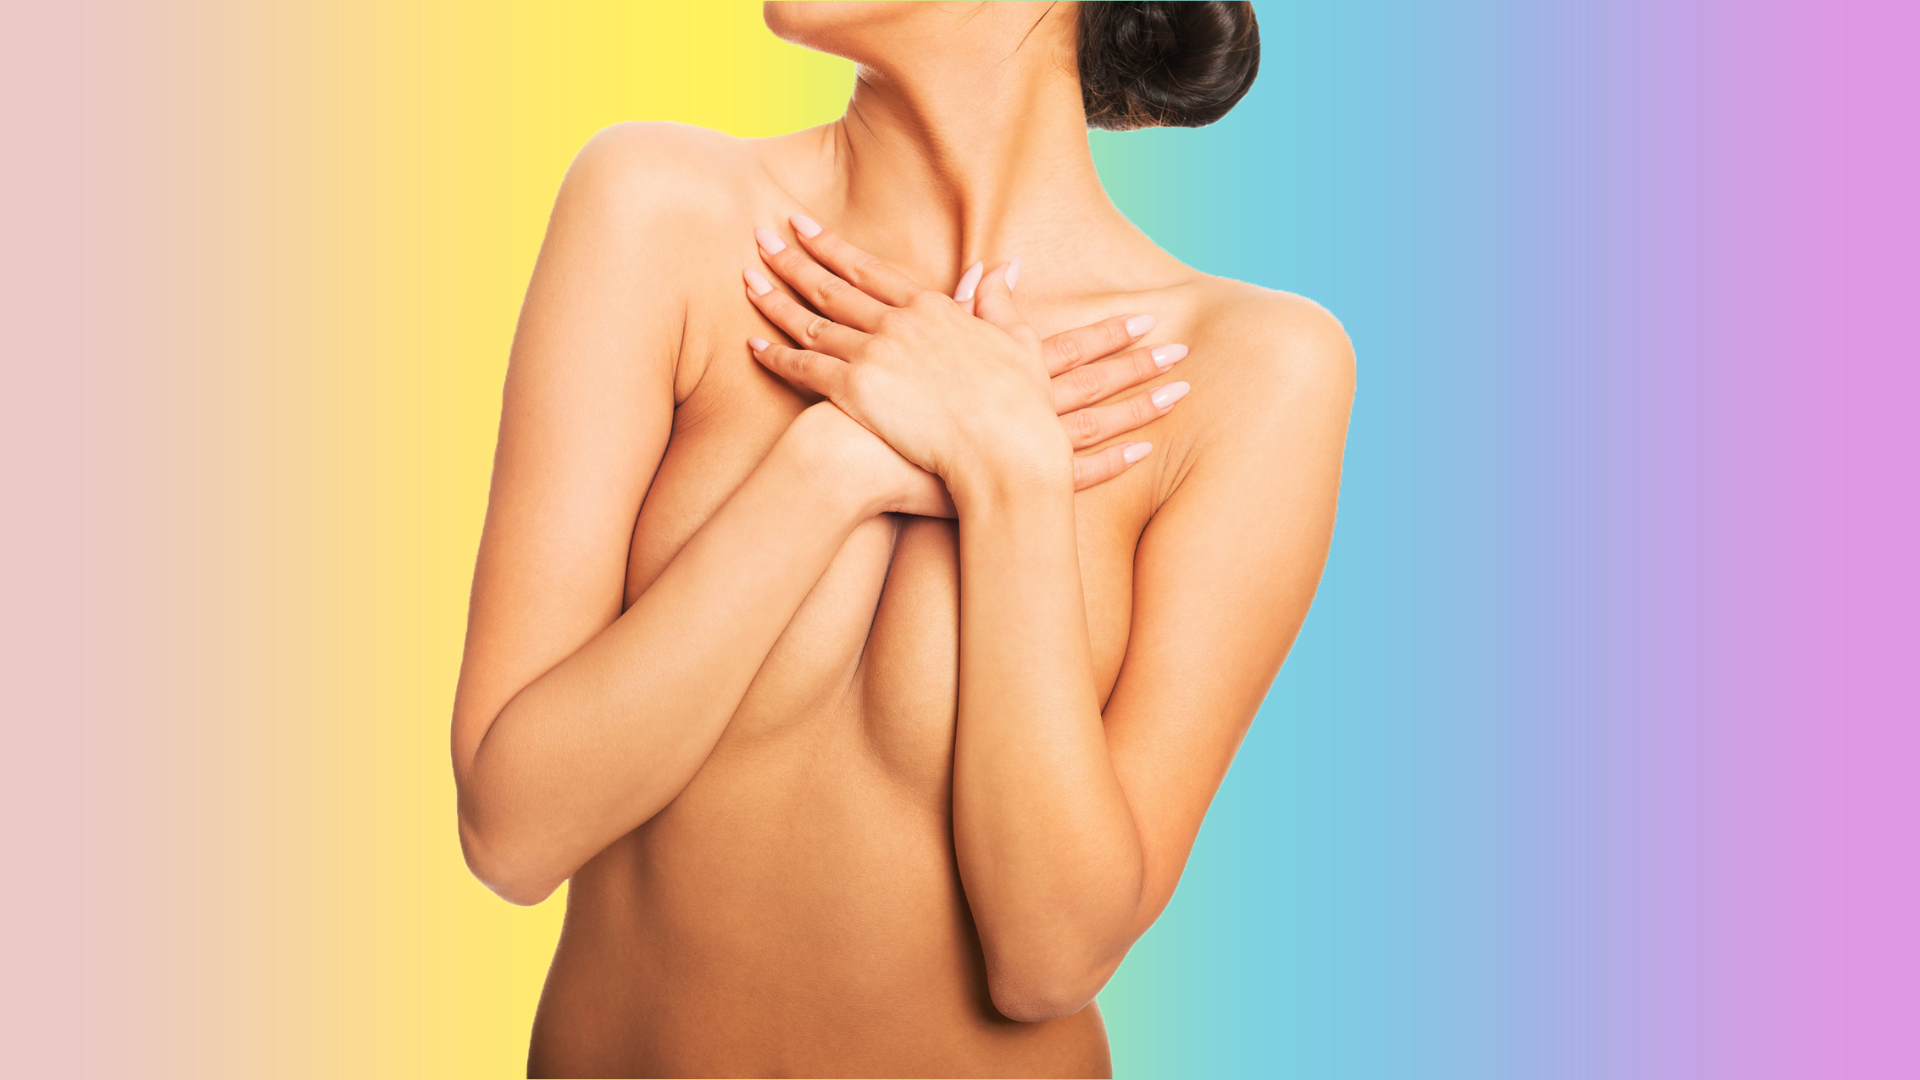 Breast Massage Benefits Are Hard to Prove, But I Loved It photo image image